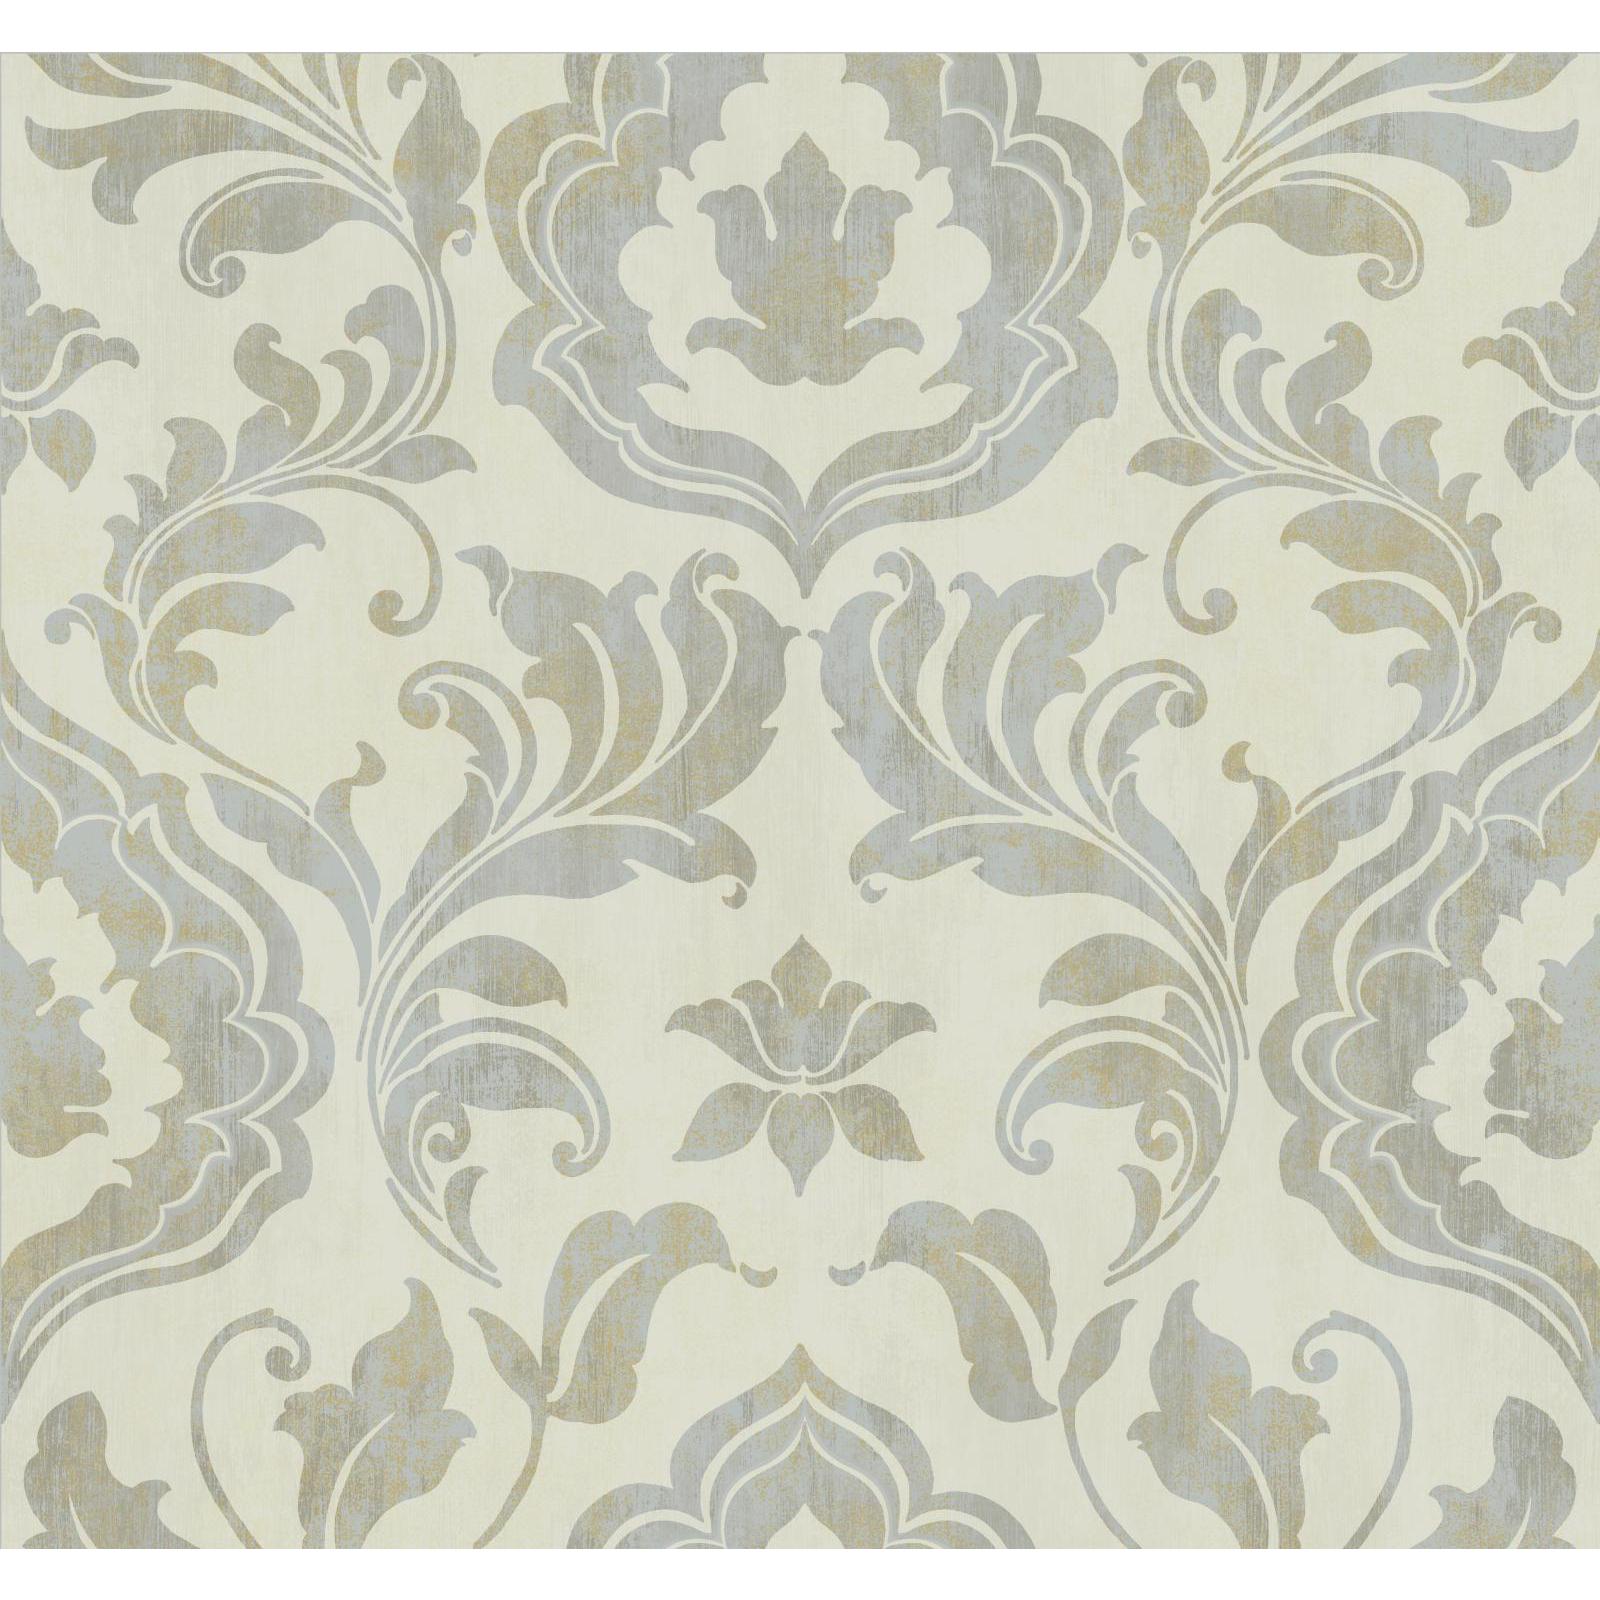 York Wallcoverings Gold Leaf Contempo Damask Wallpaper